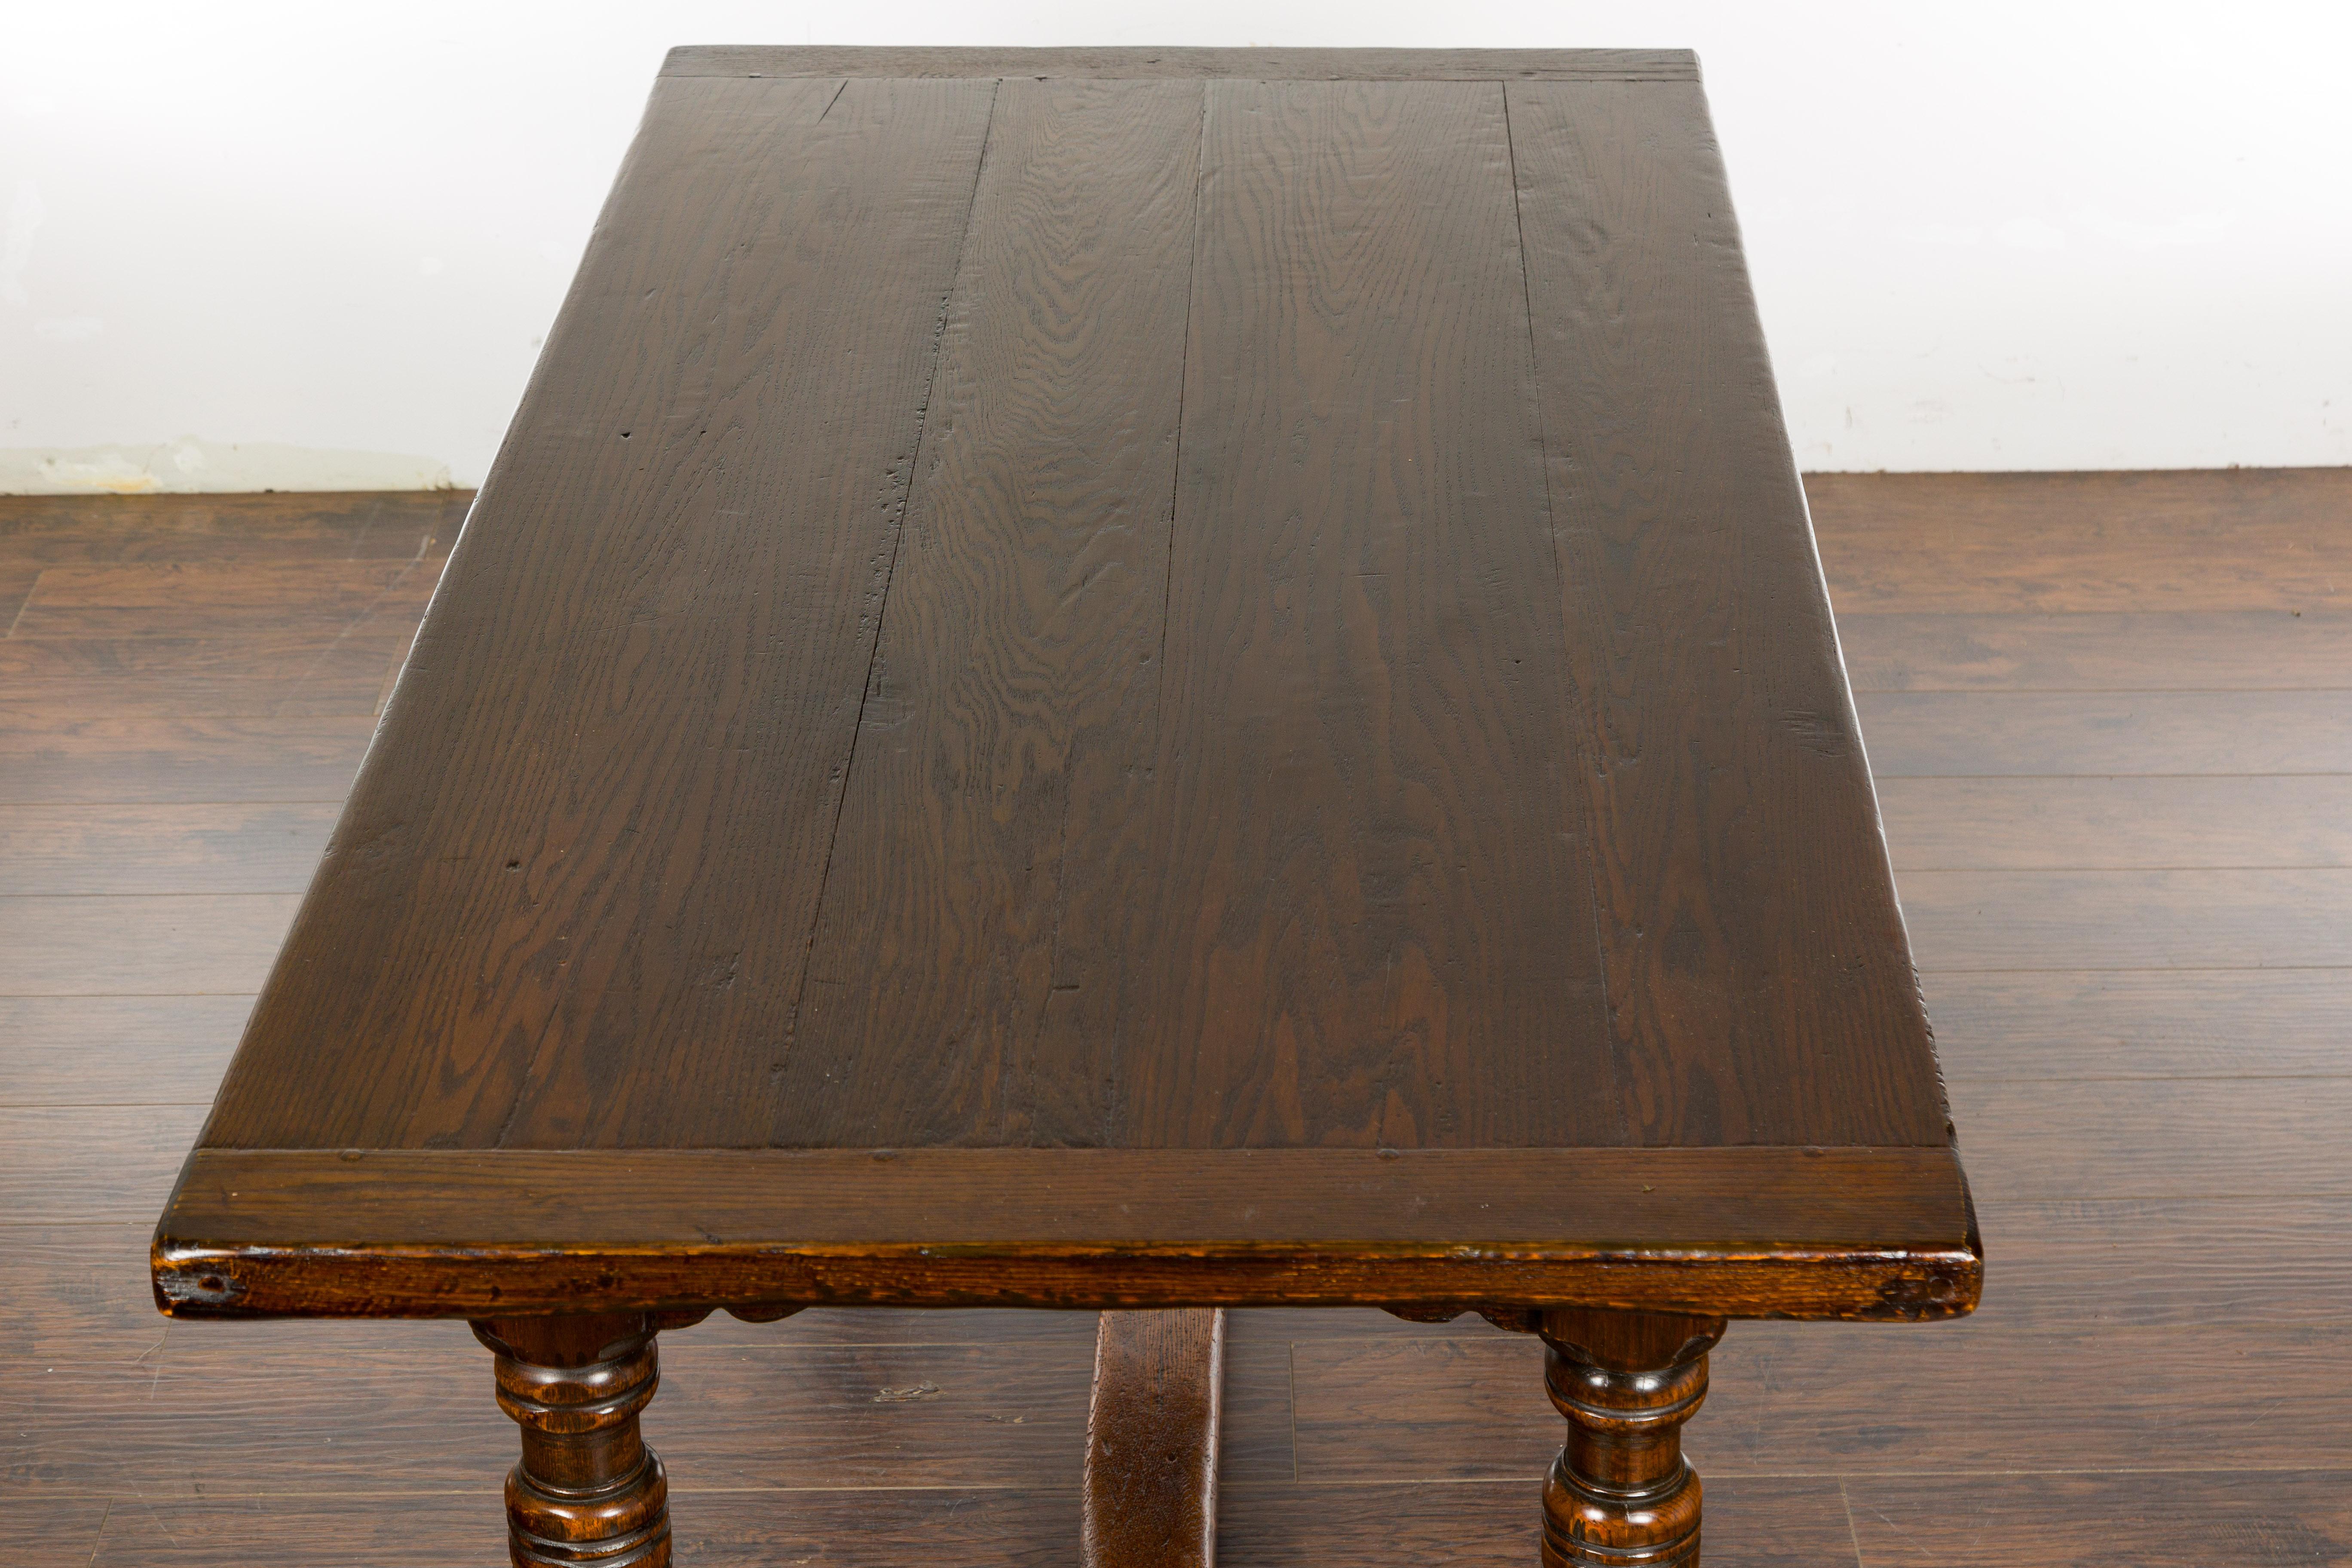 19th Century English Oak Table with Carved Apron and Turned Legs For Sale 13